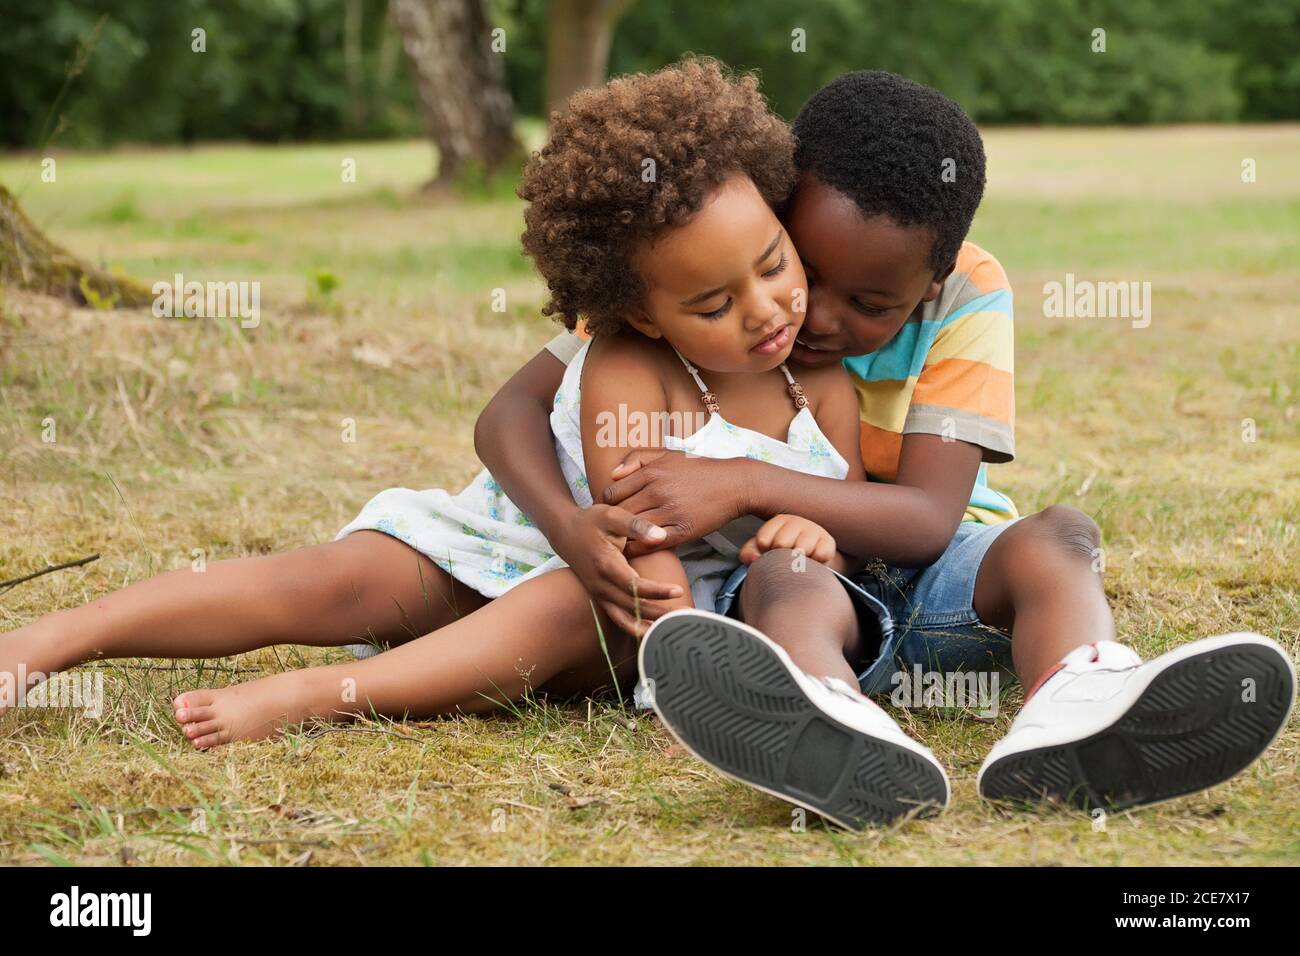 Big brother is caring of his sister Stock Photo